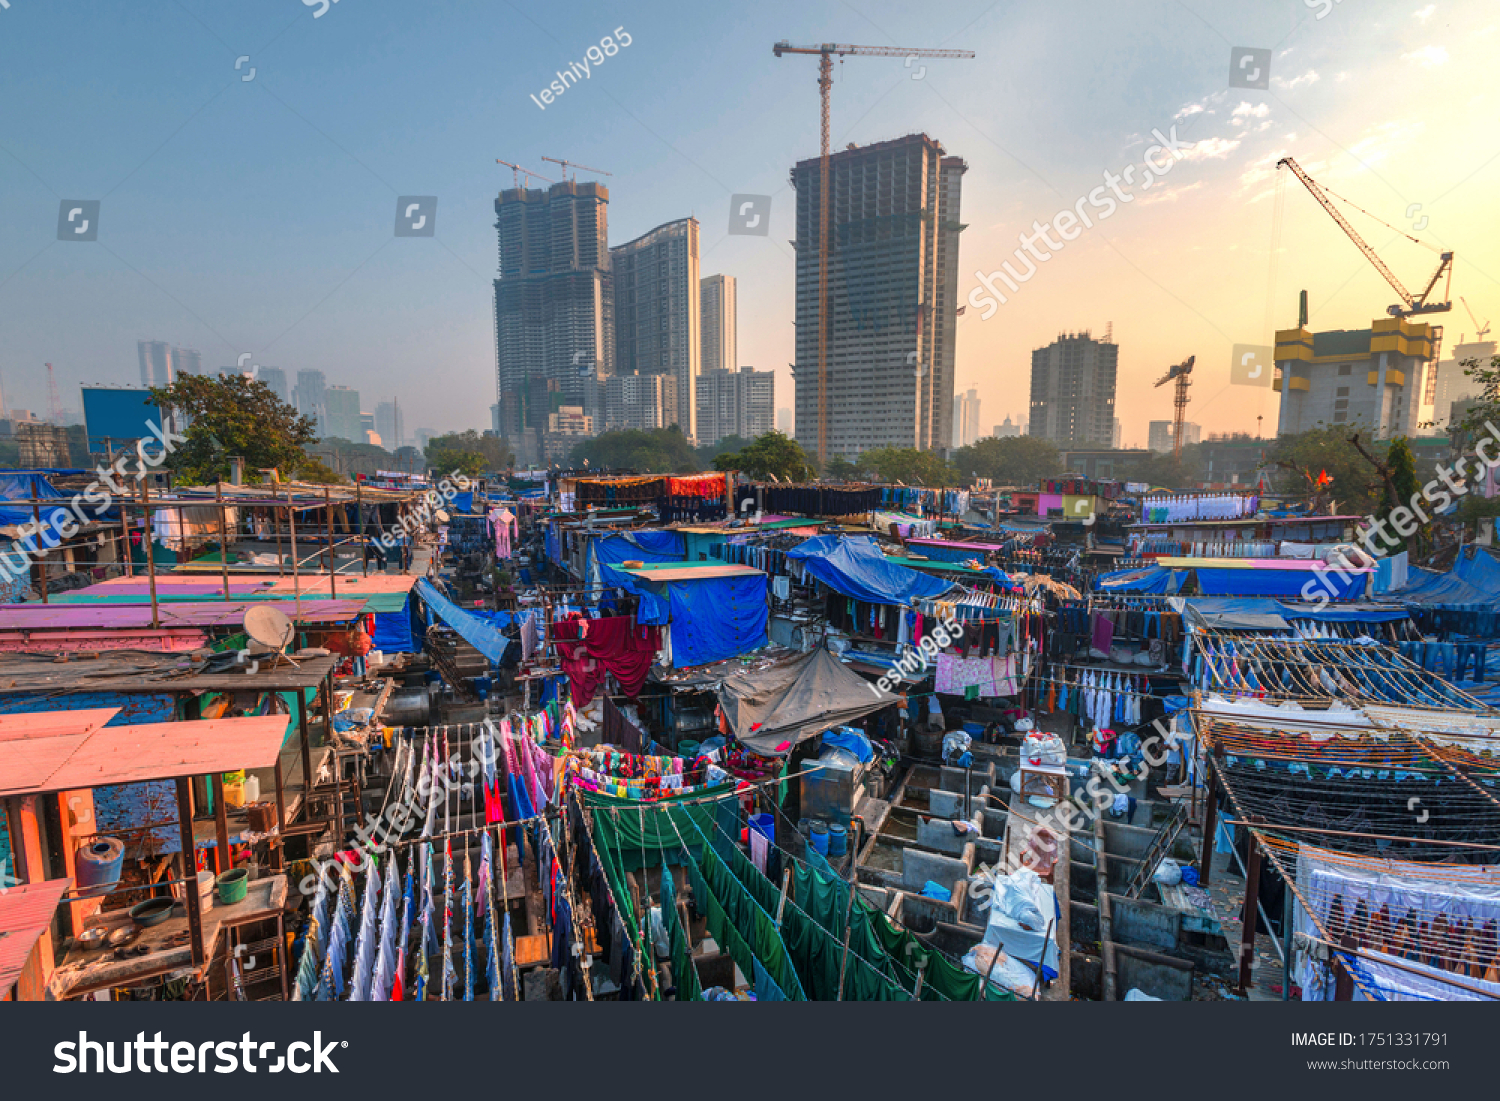 
Selective focus. Dhobi Ghat also known as Mahalaxmi Dhobi Ghat is the largest open air laundromat in Mumbai. one of the most recognizable landmarks and tourist attractions of Mumbai #1751331791